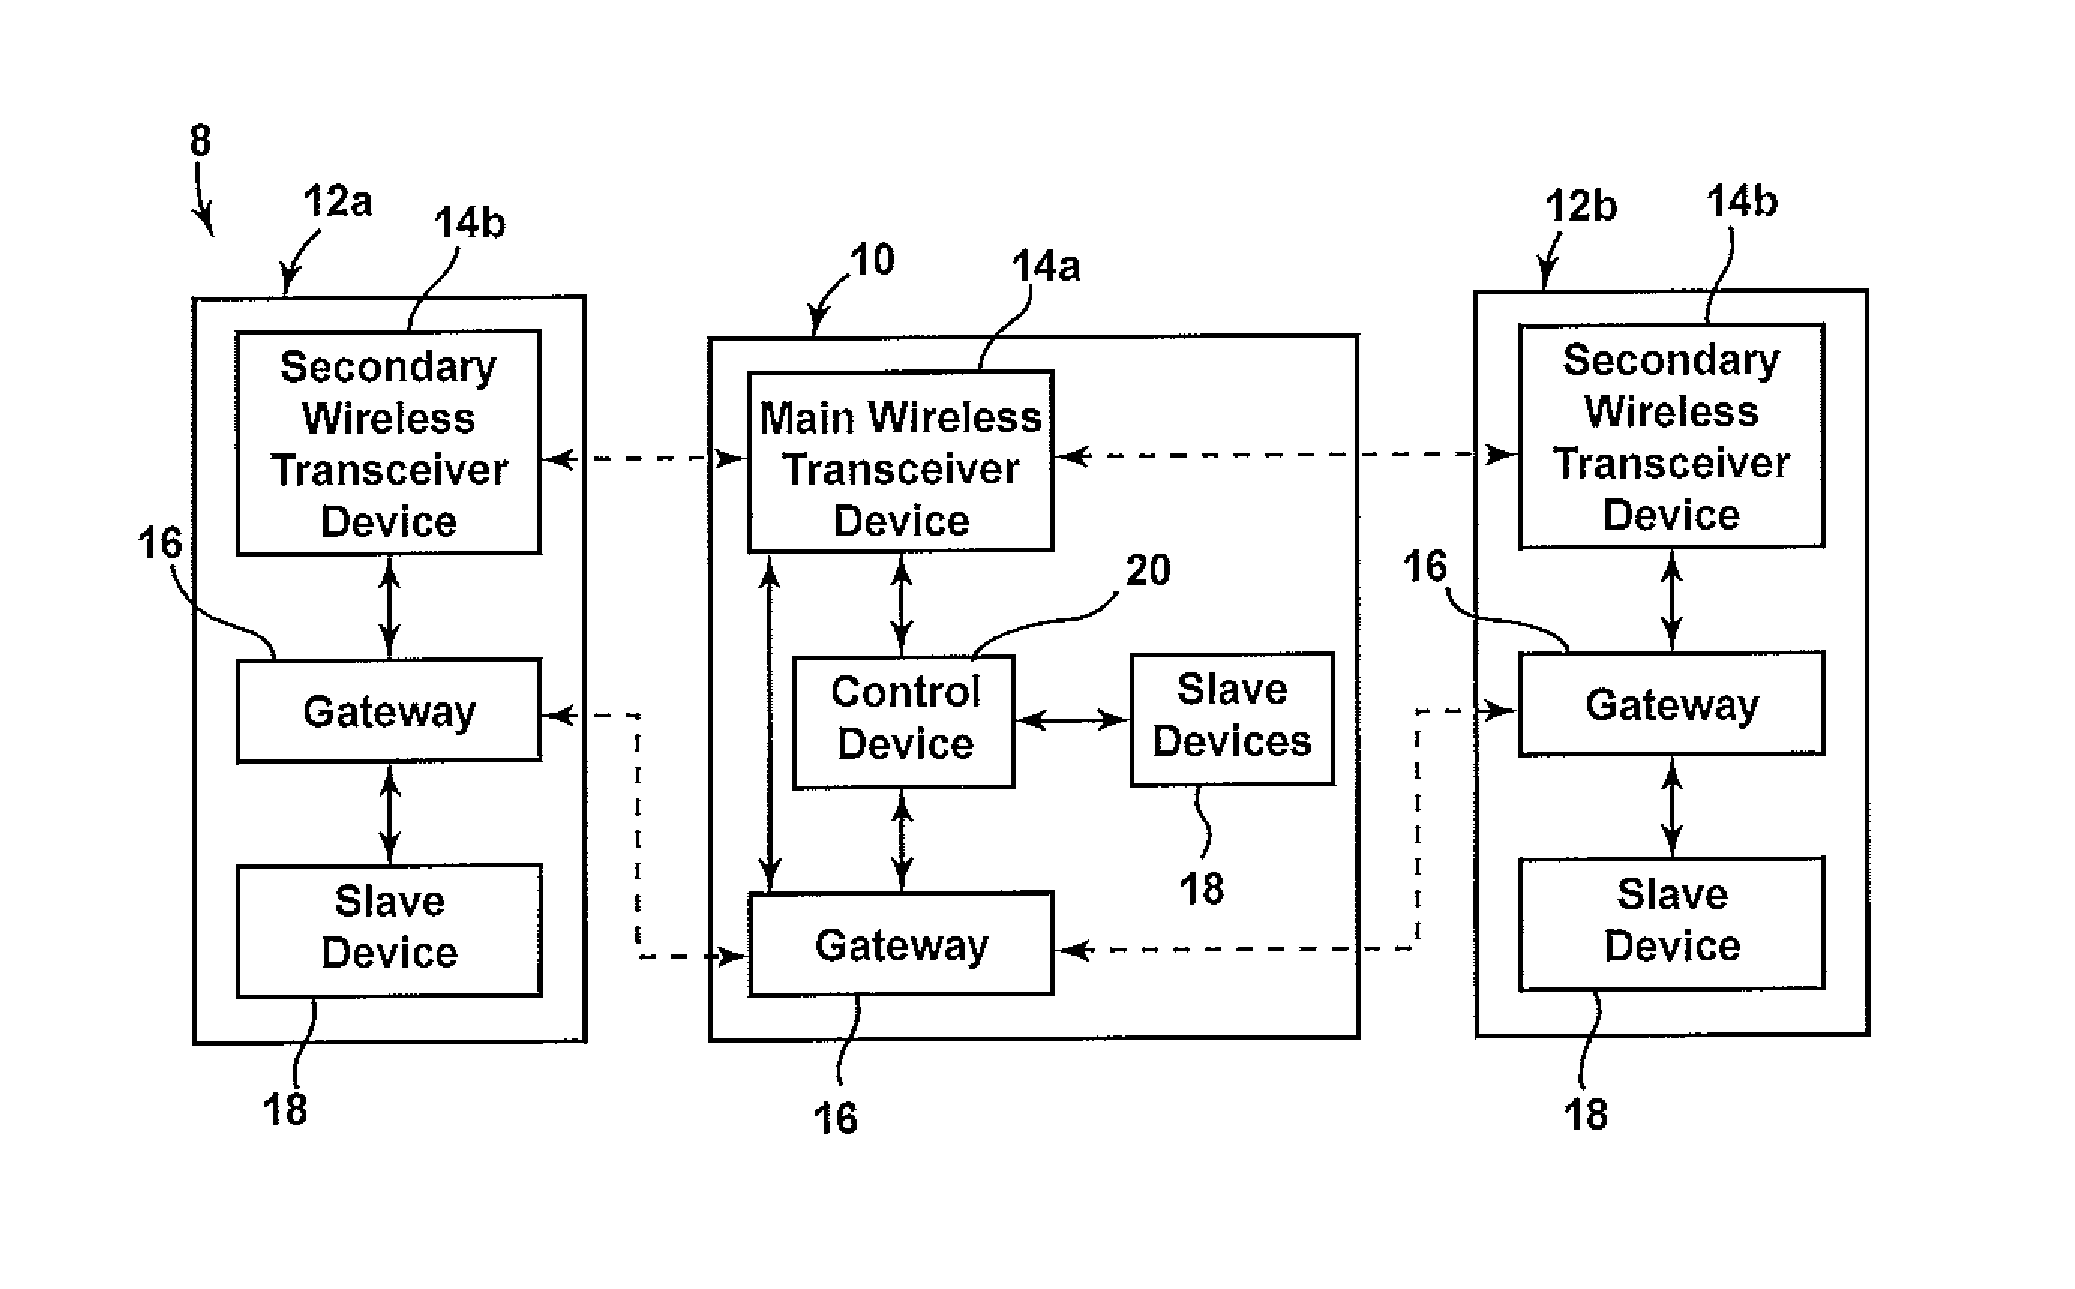 Method of wireless discovery and networking of medical devices in care environments